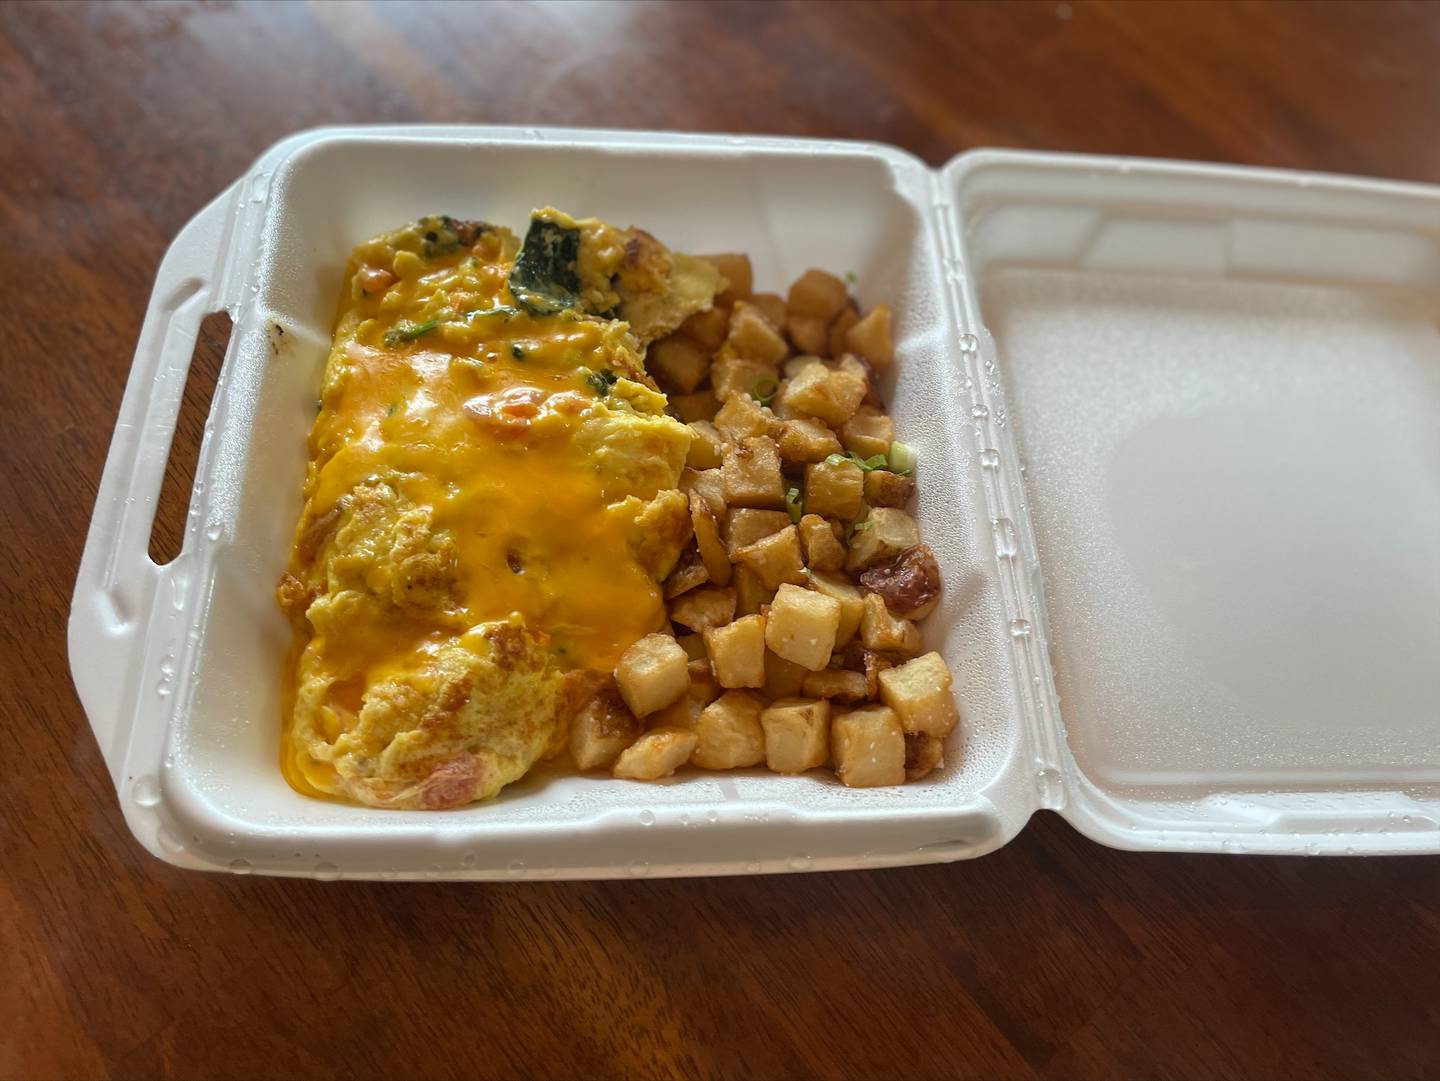 Build your own omelette with extra American cheese, spinach and tomatoes with a side of potatoes from Eggceptional Cafe, 2749 Algonquin Rd., Algonquin.